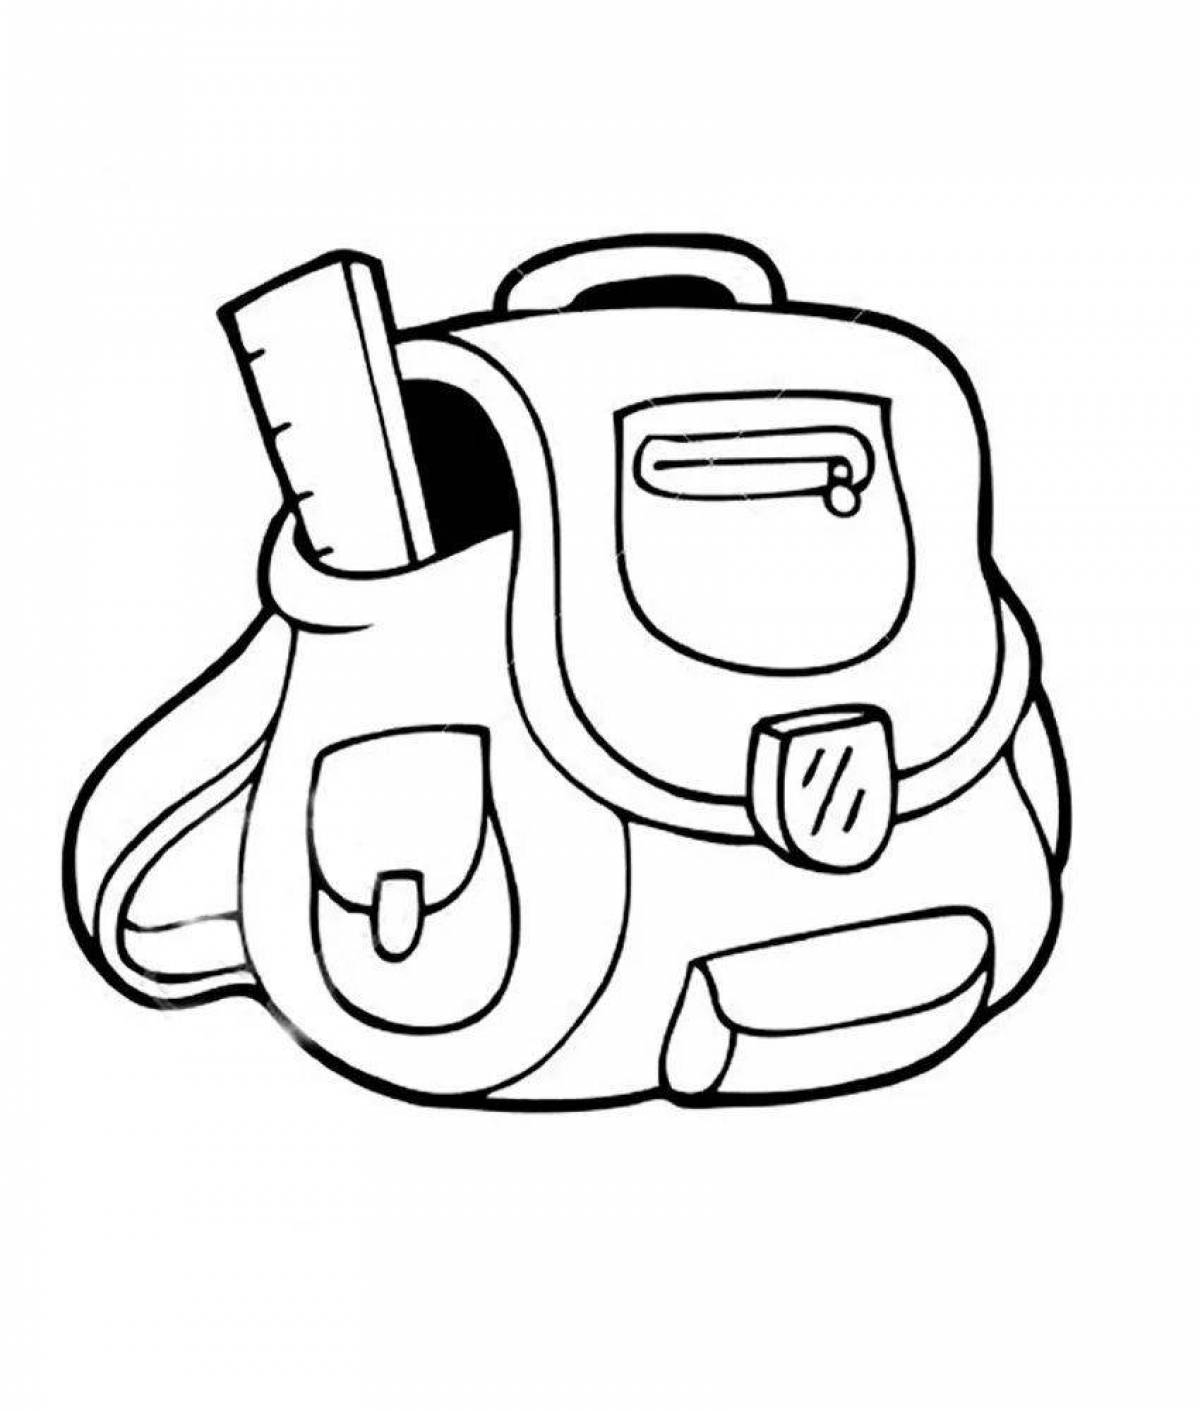 Adorable backpack coloring book for kids